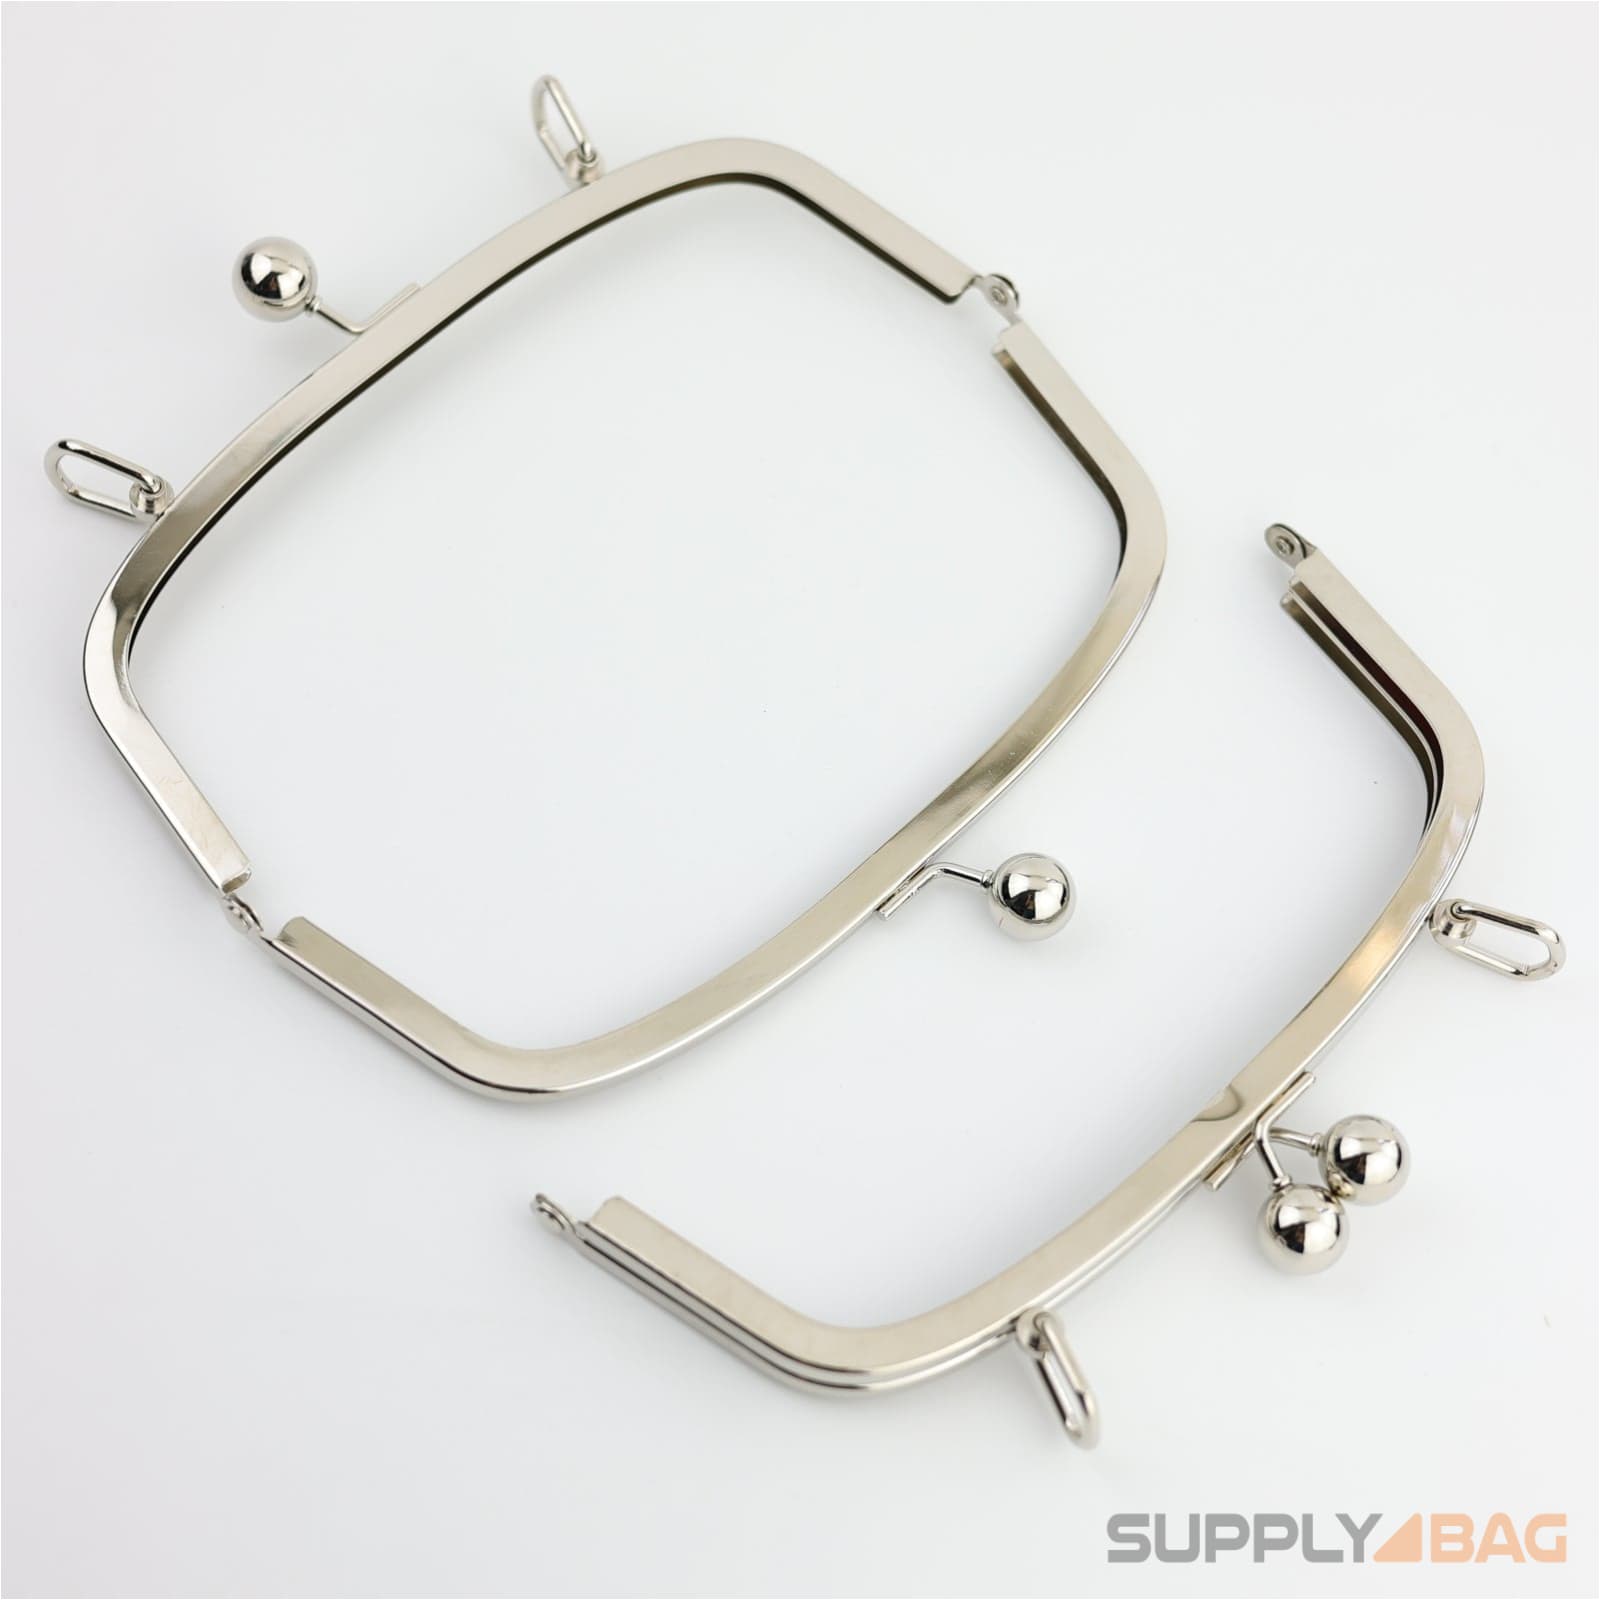 7 3/4 x 3 inch - Silver Arch Shape Metal Purse Frame with D Rings on Top